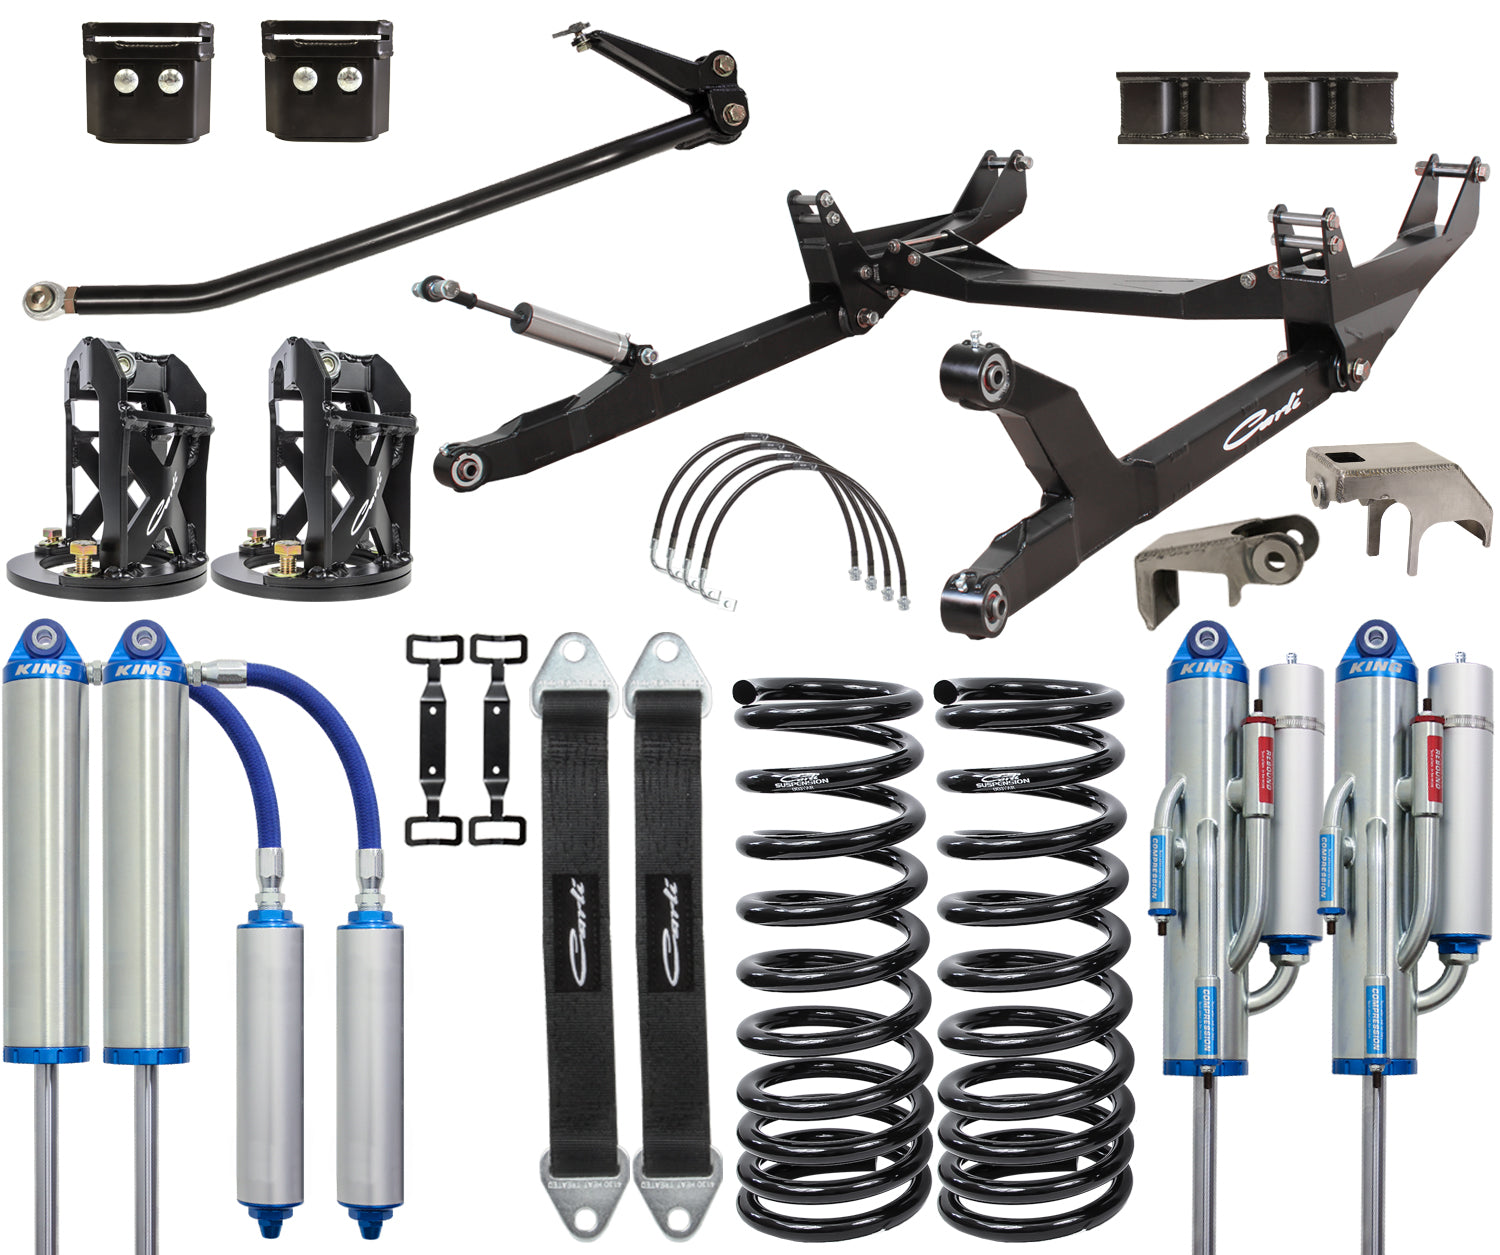 Carli Suspension CS-DUC35-6-10 6.0 inch Lift Unchained System